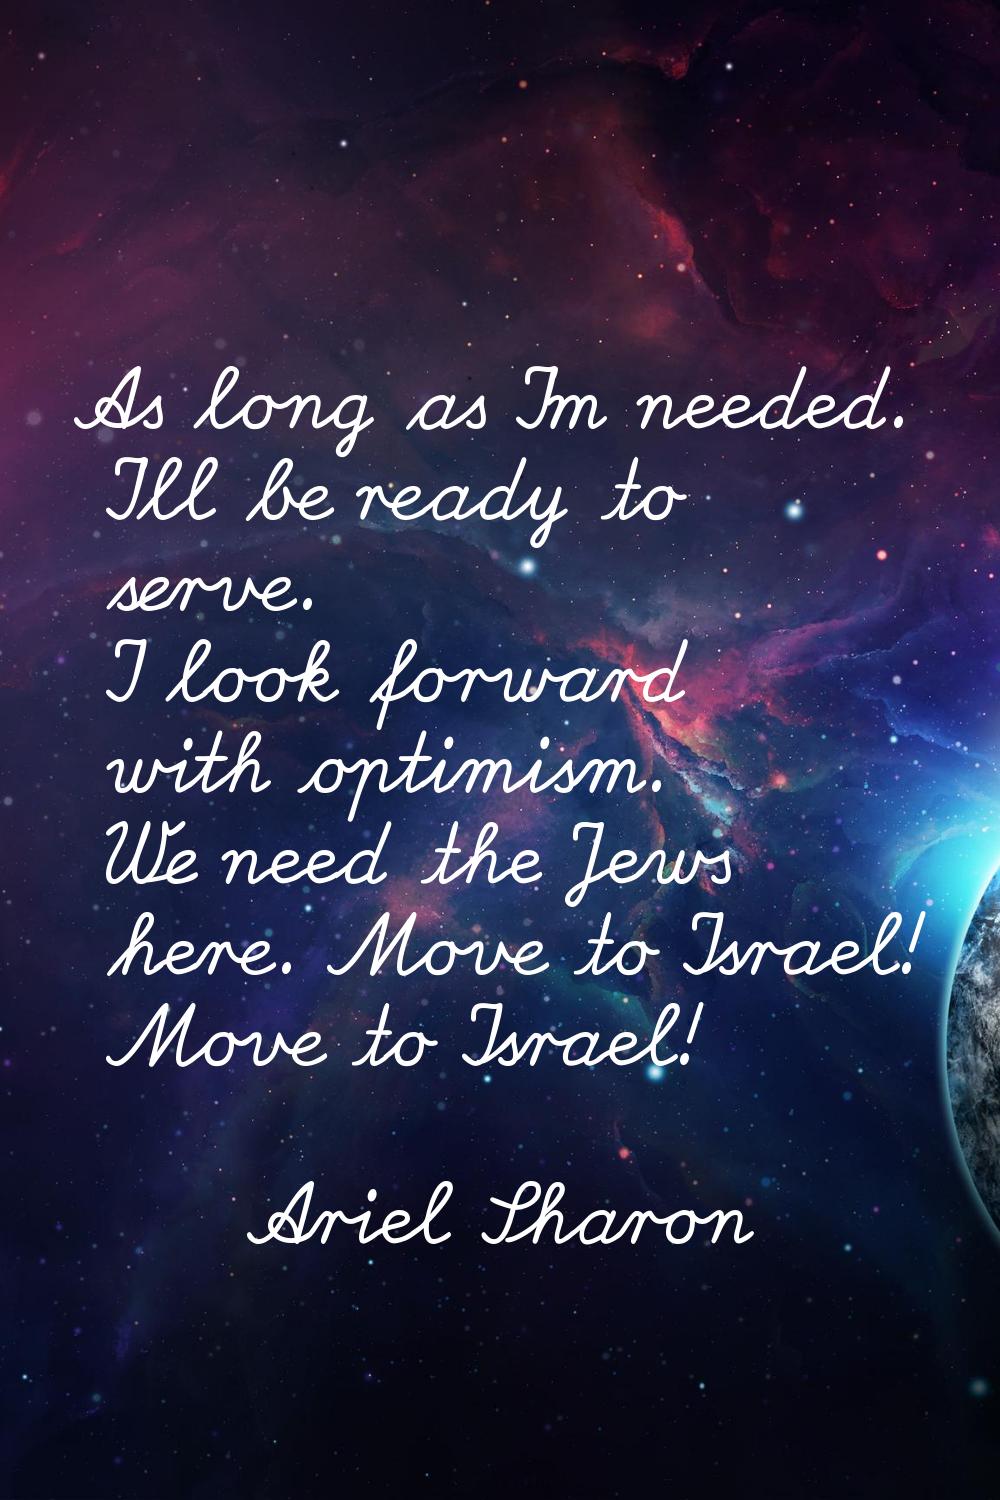 As long as I'm needed. I'll be ready to serve. I look forward with optimism. We need the Jews here.